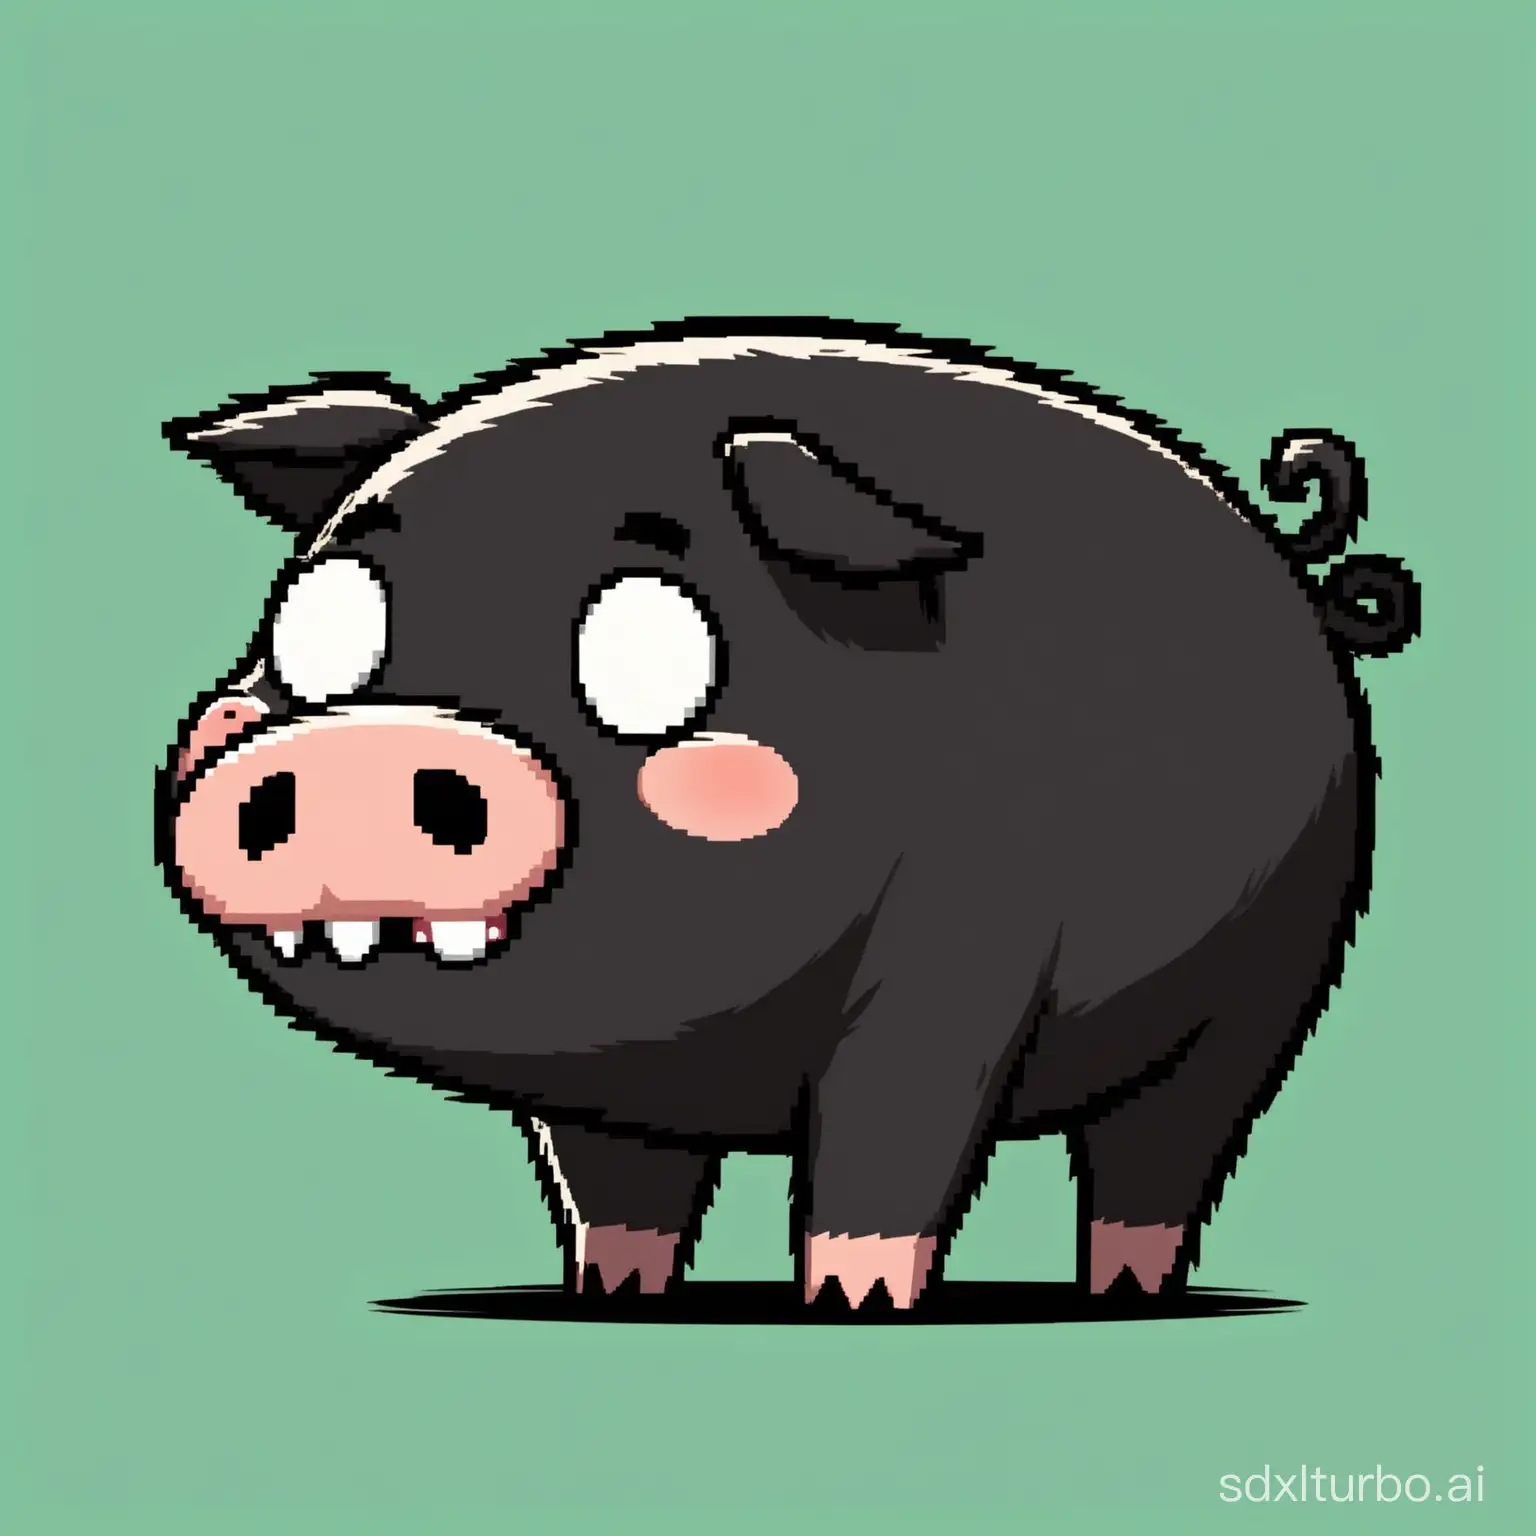 a 2d video game character black pig with  huge teeth, side view